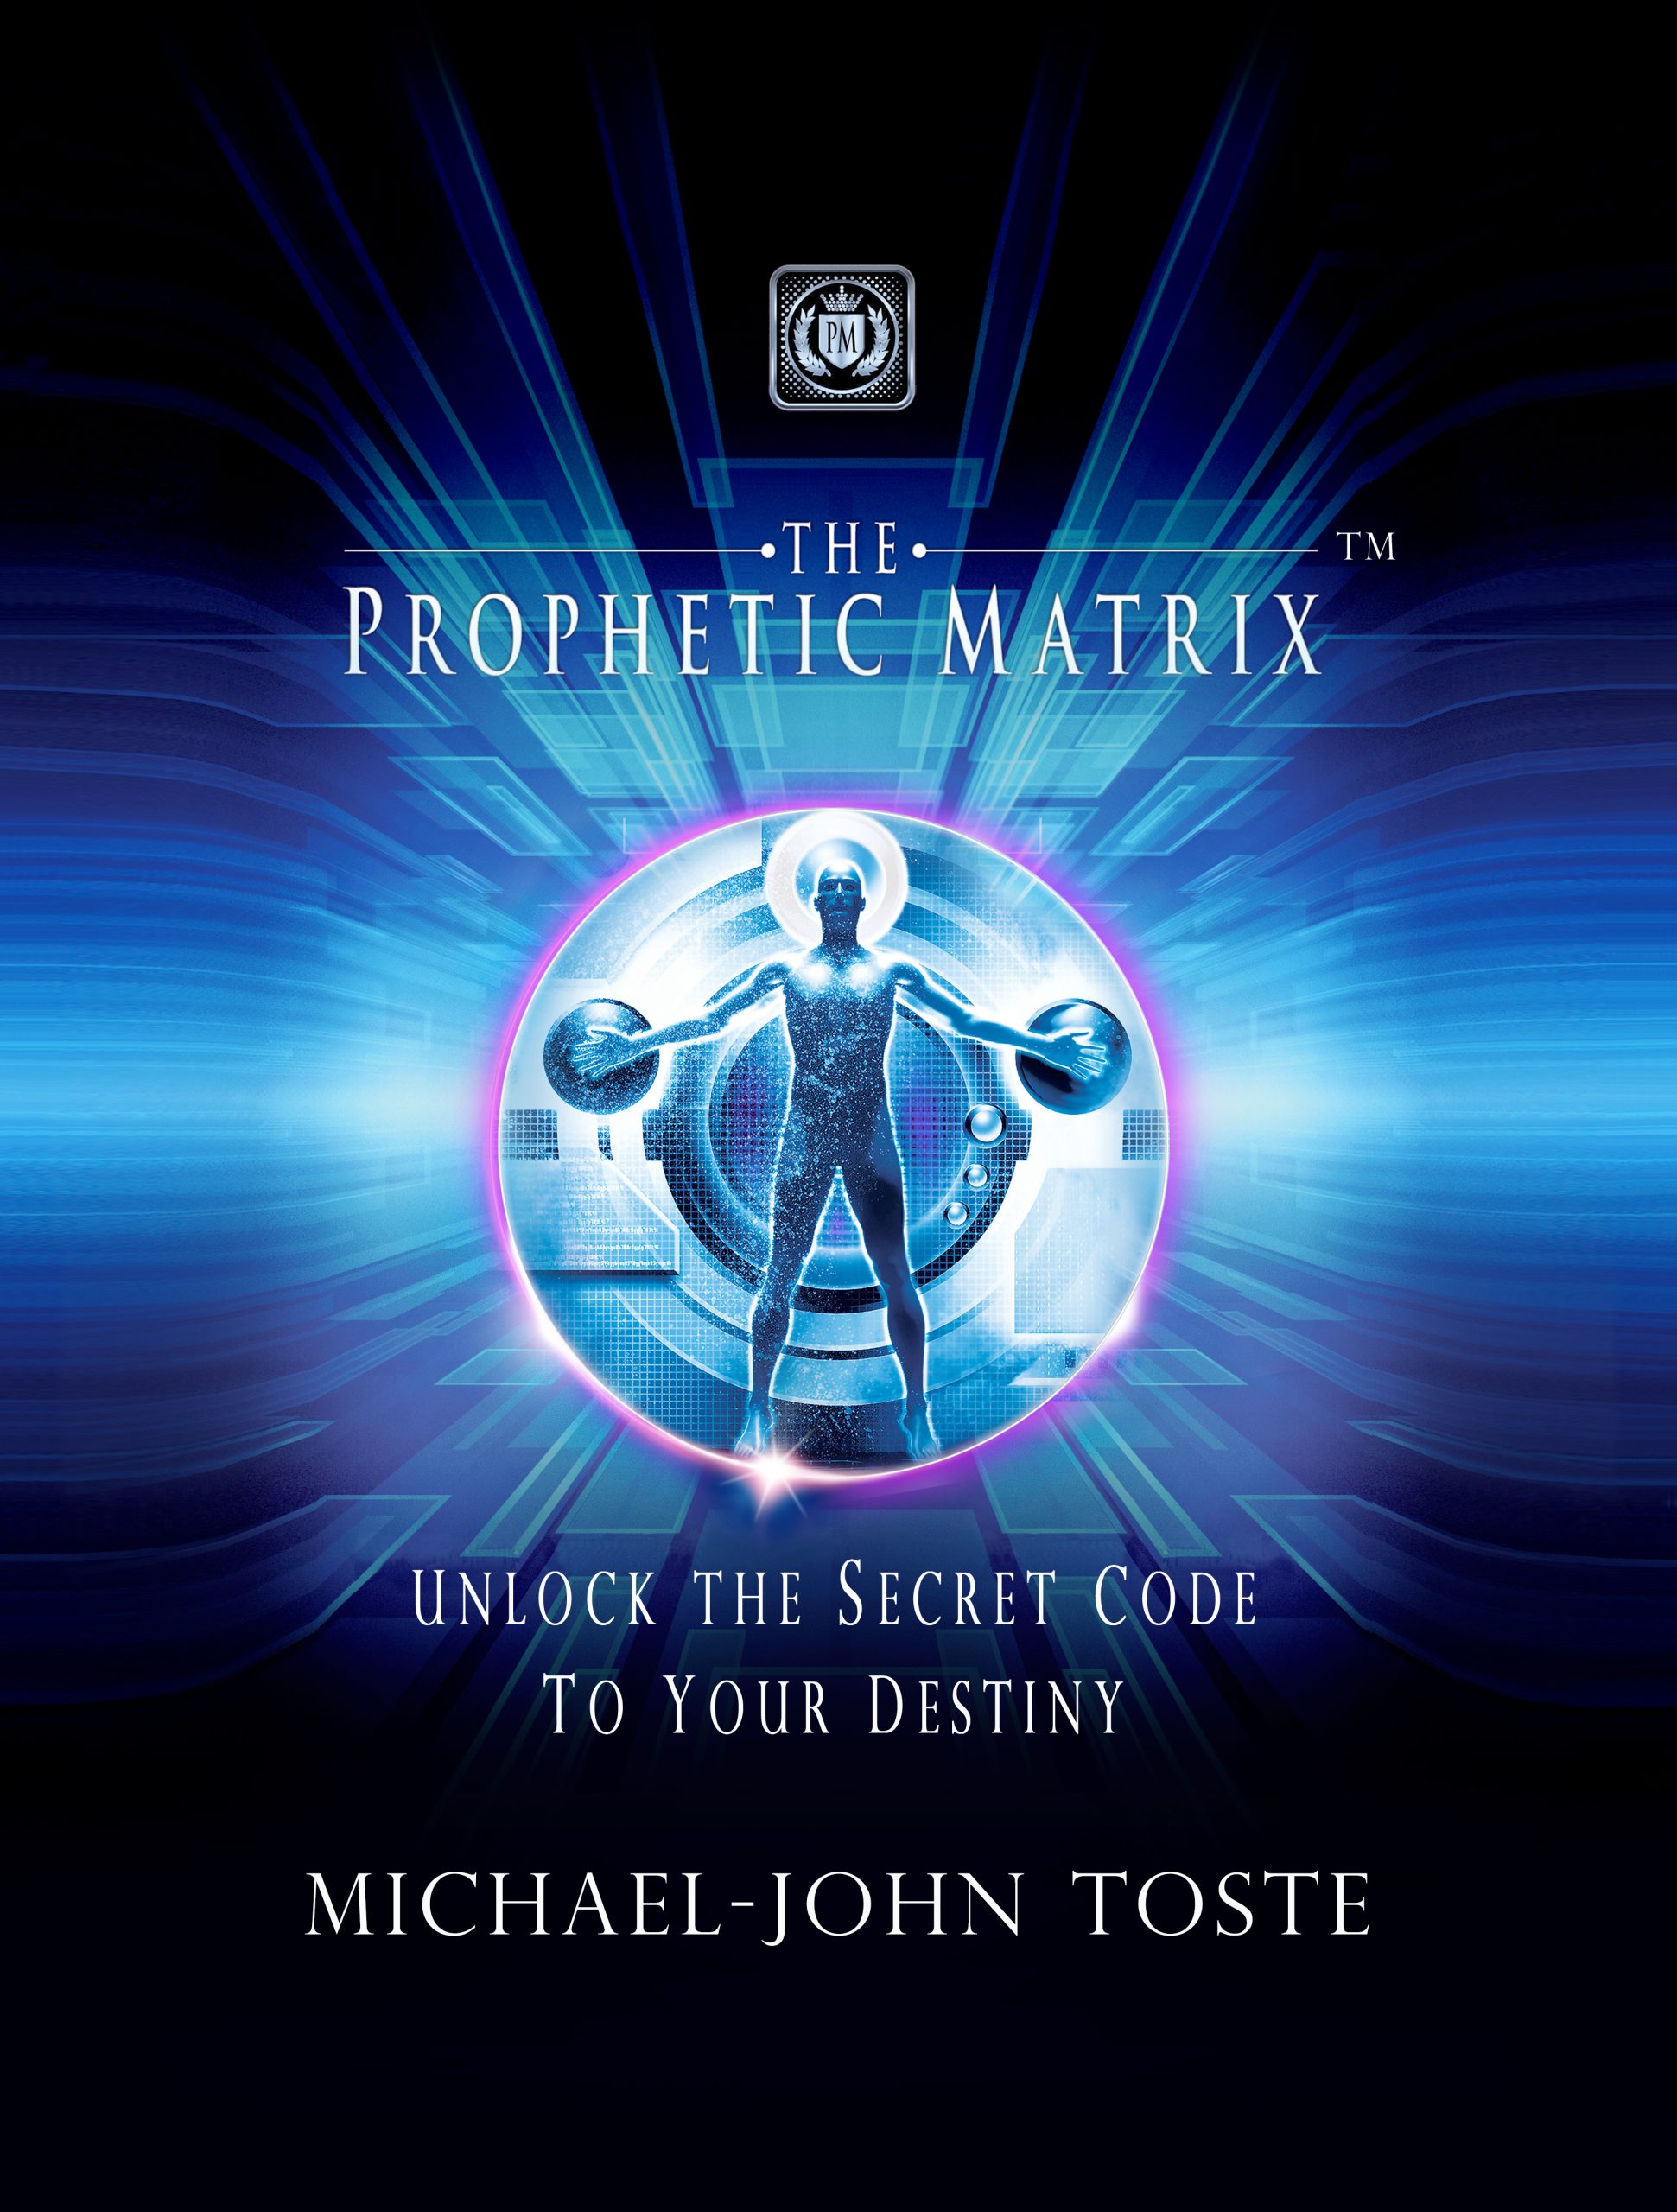 2022 01 29 V44.The Prophetic Matrix Book Cover 1.29.22 scaled